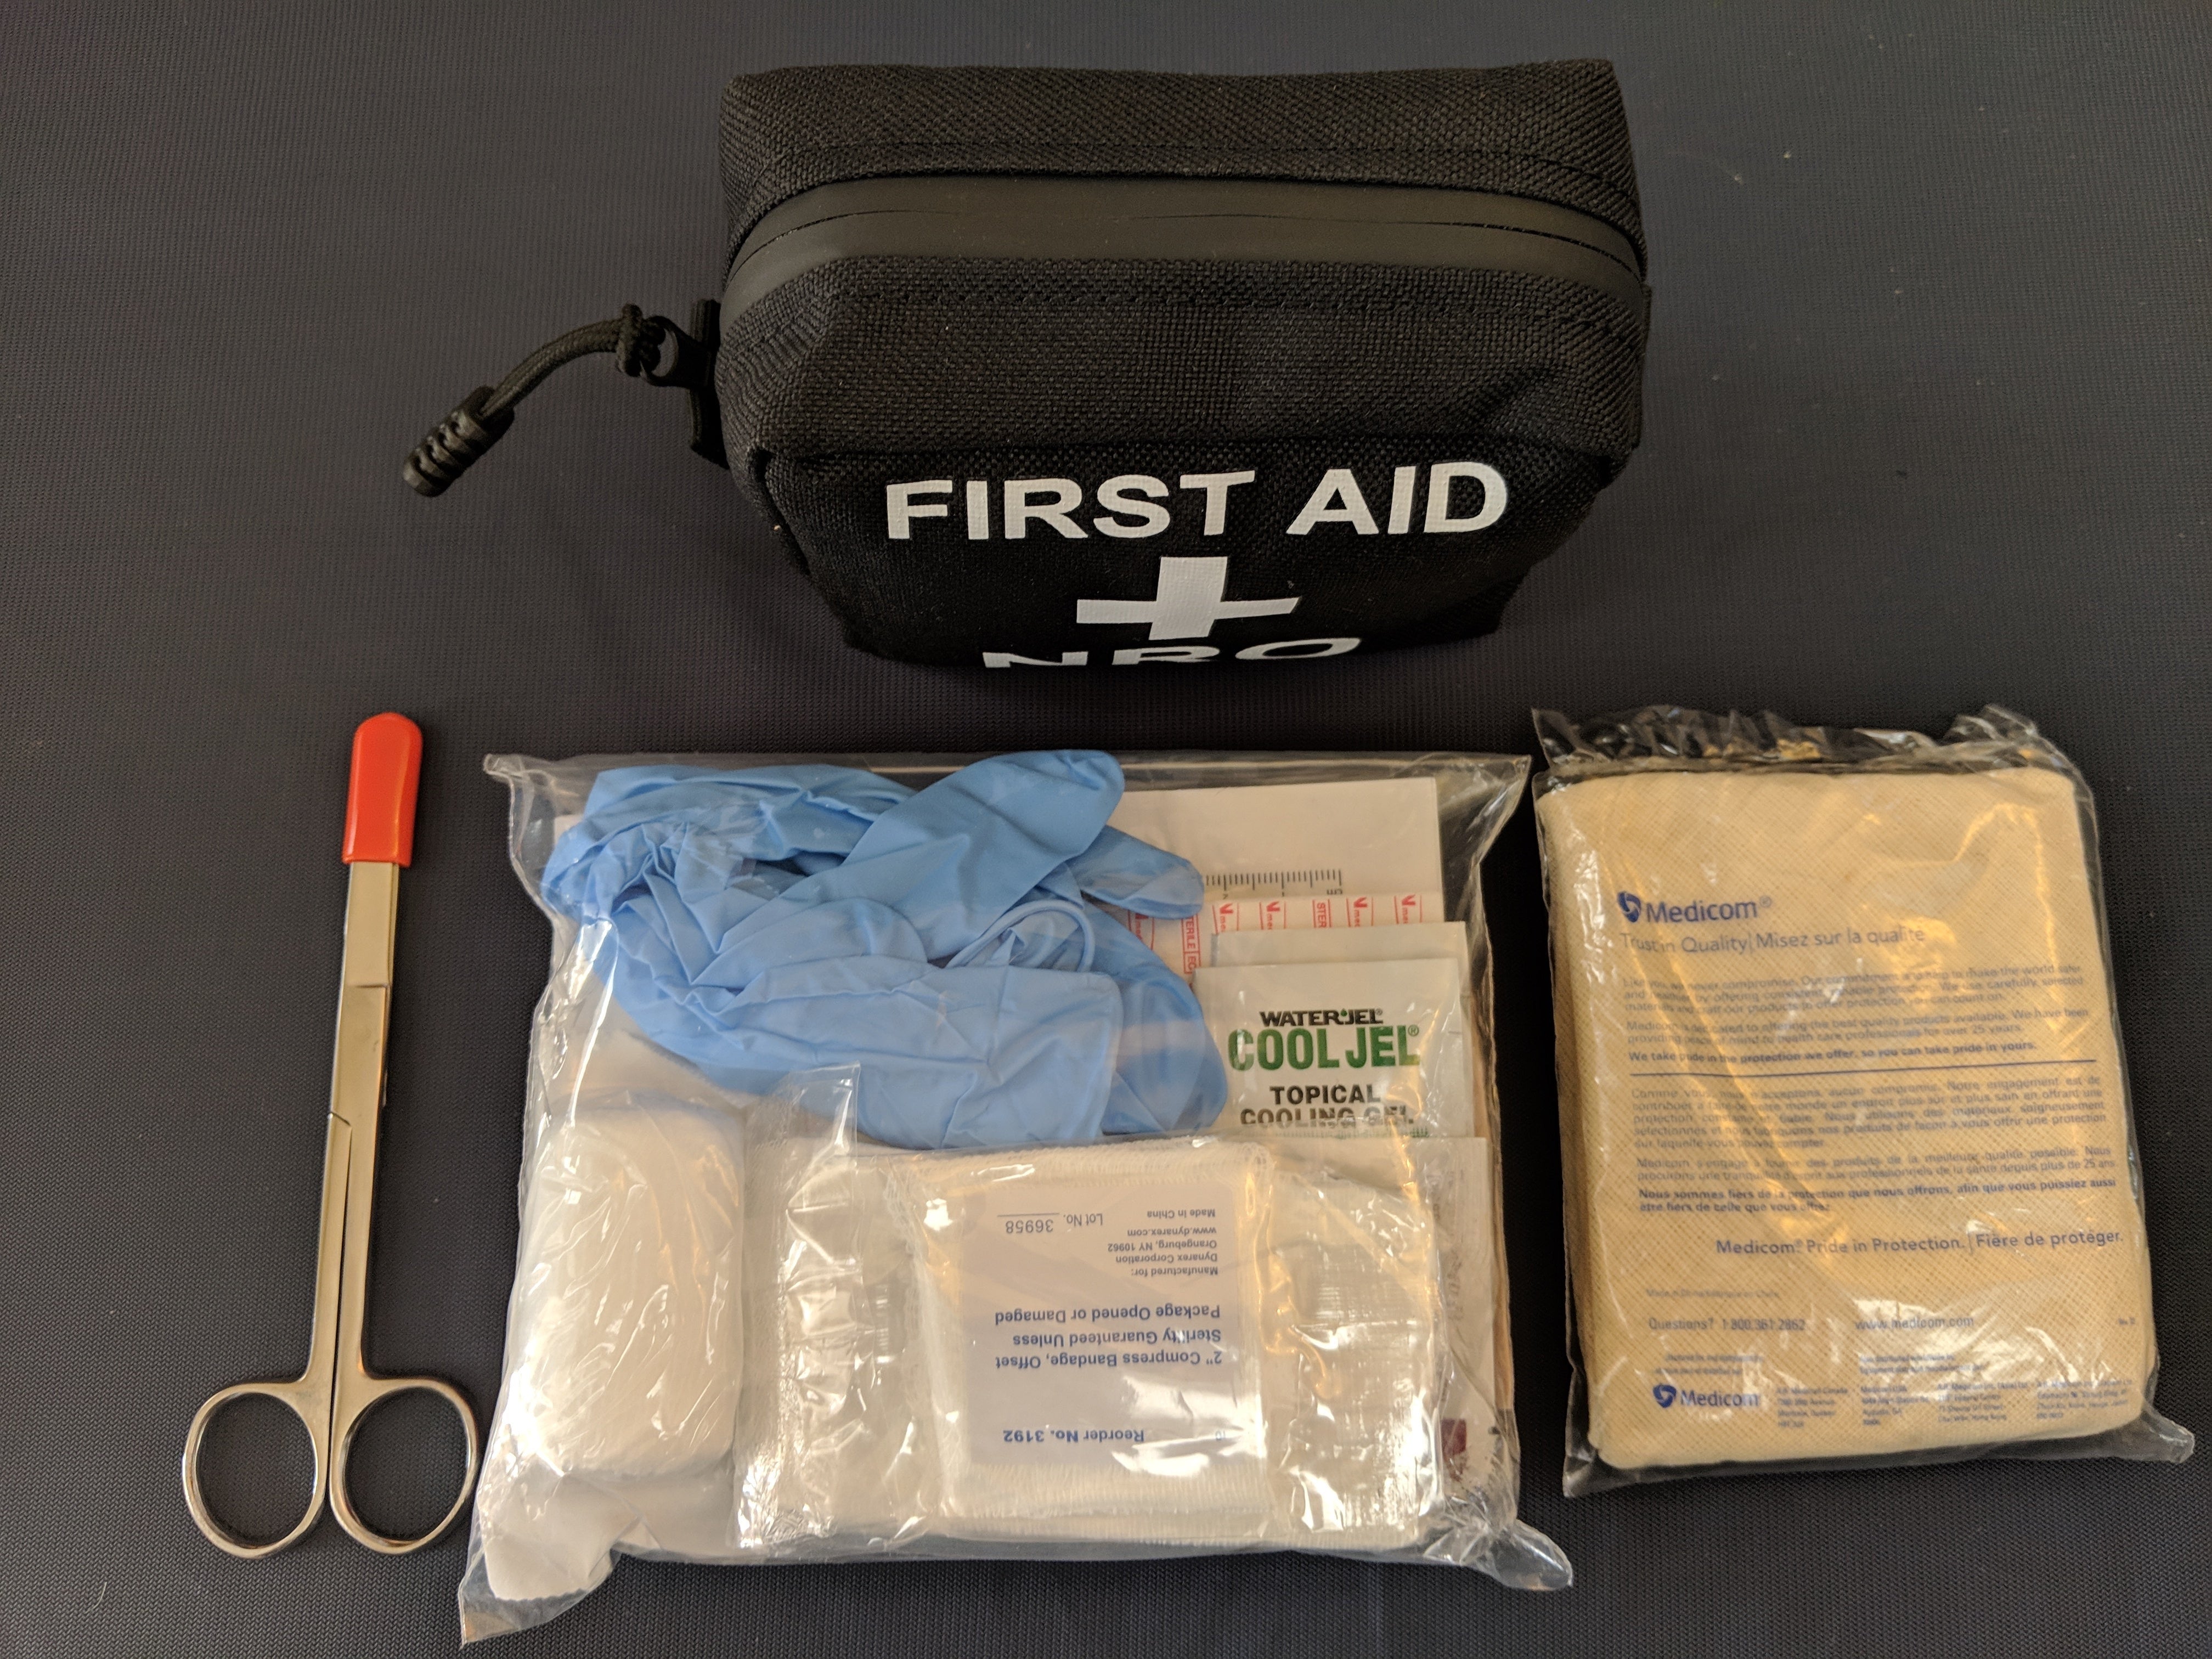 Professional First Aid kit for personal safety - 0